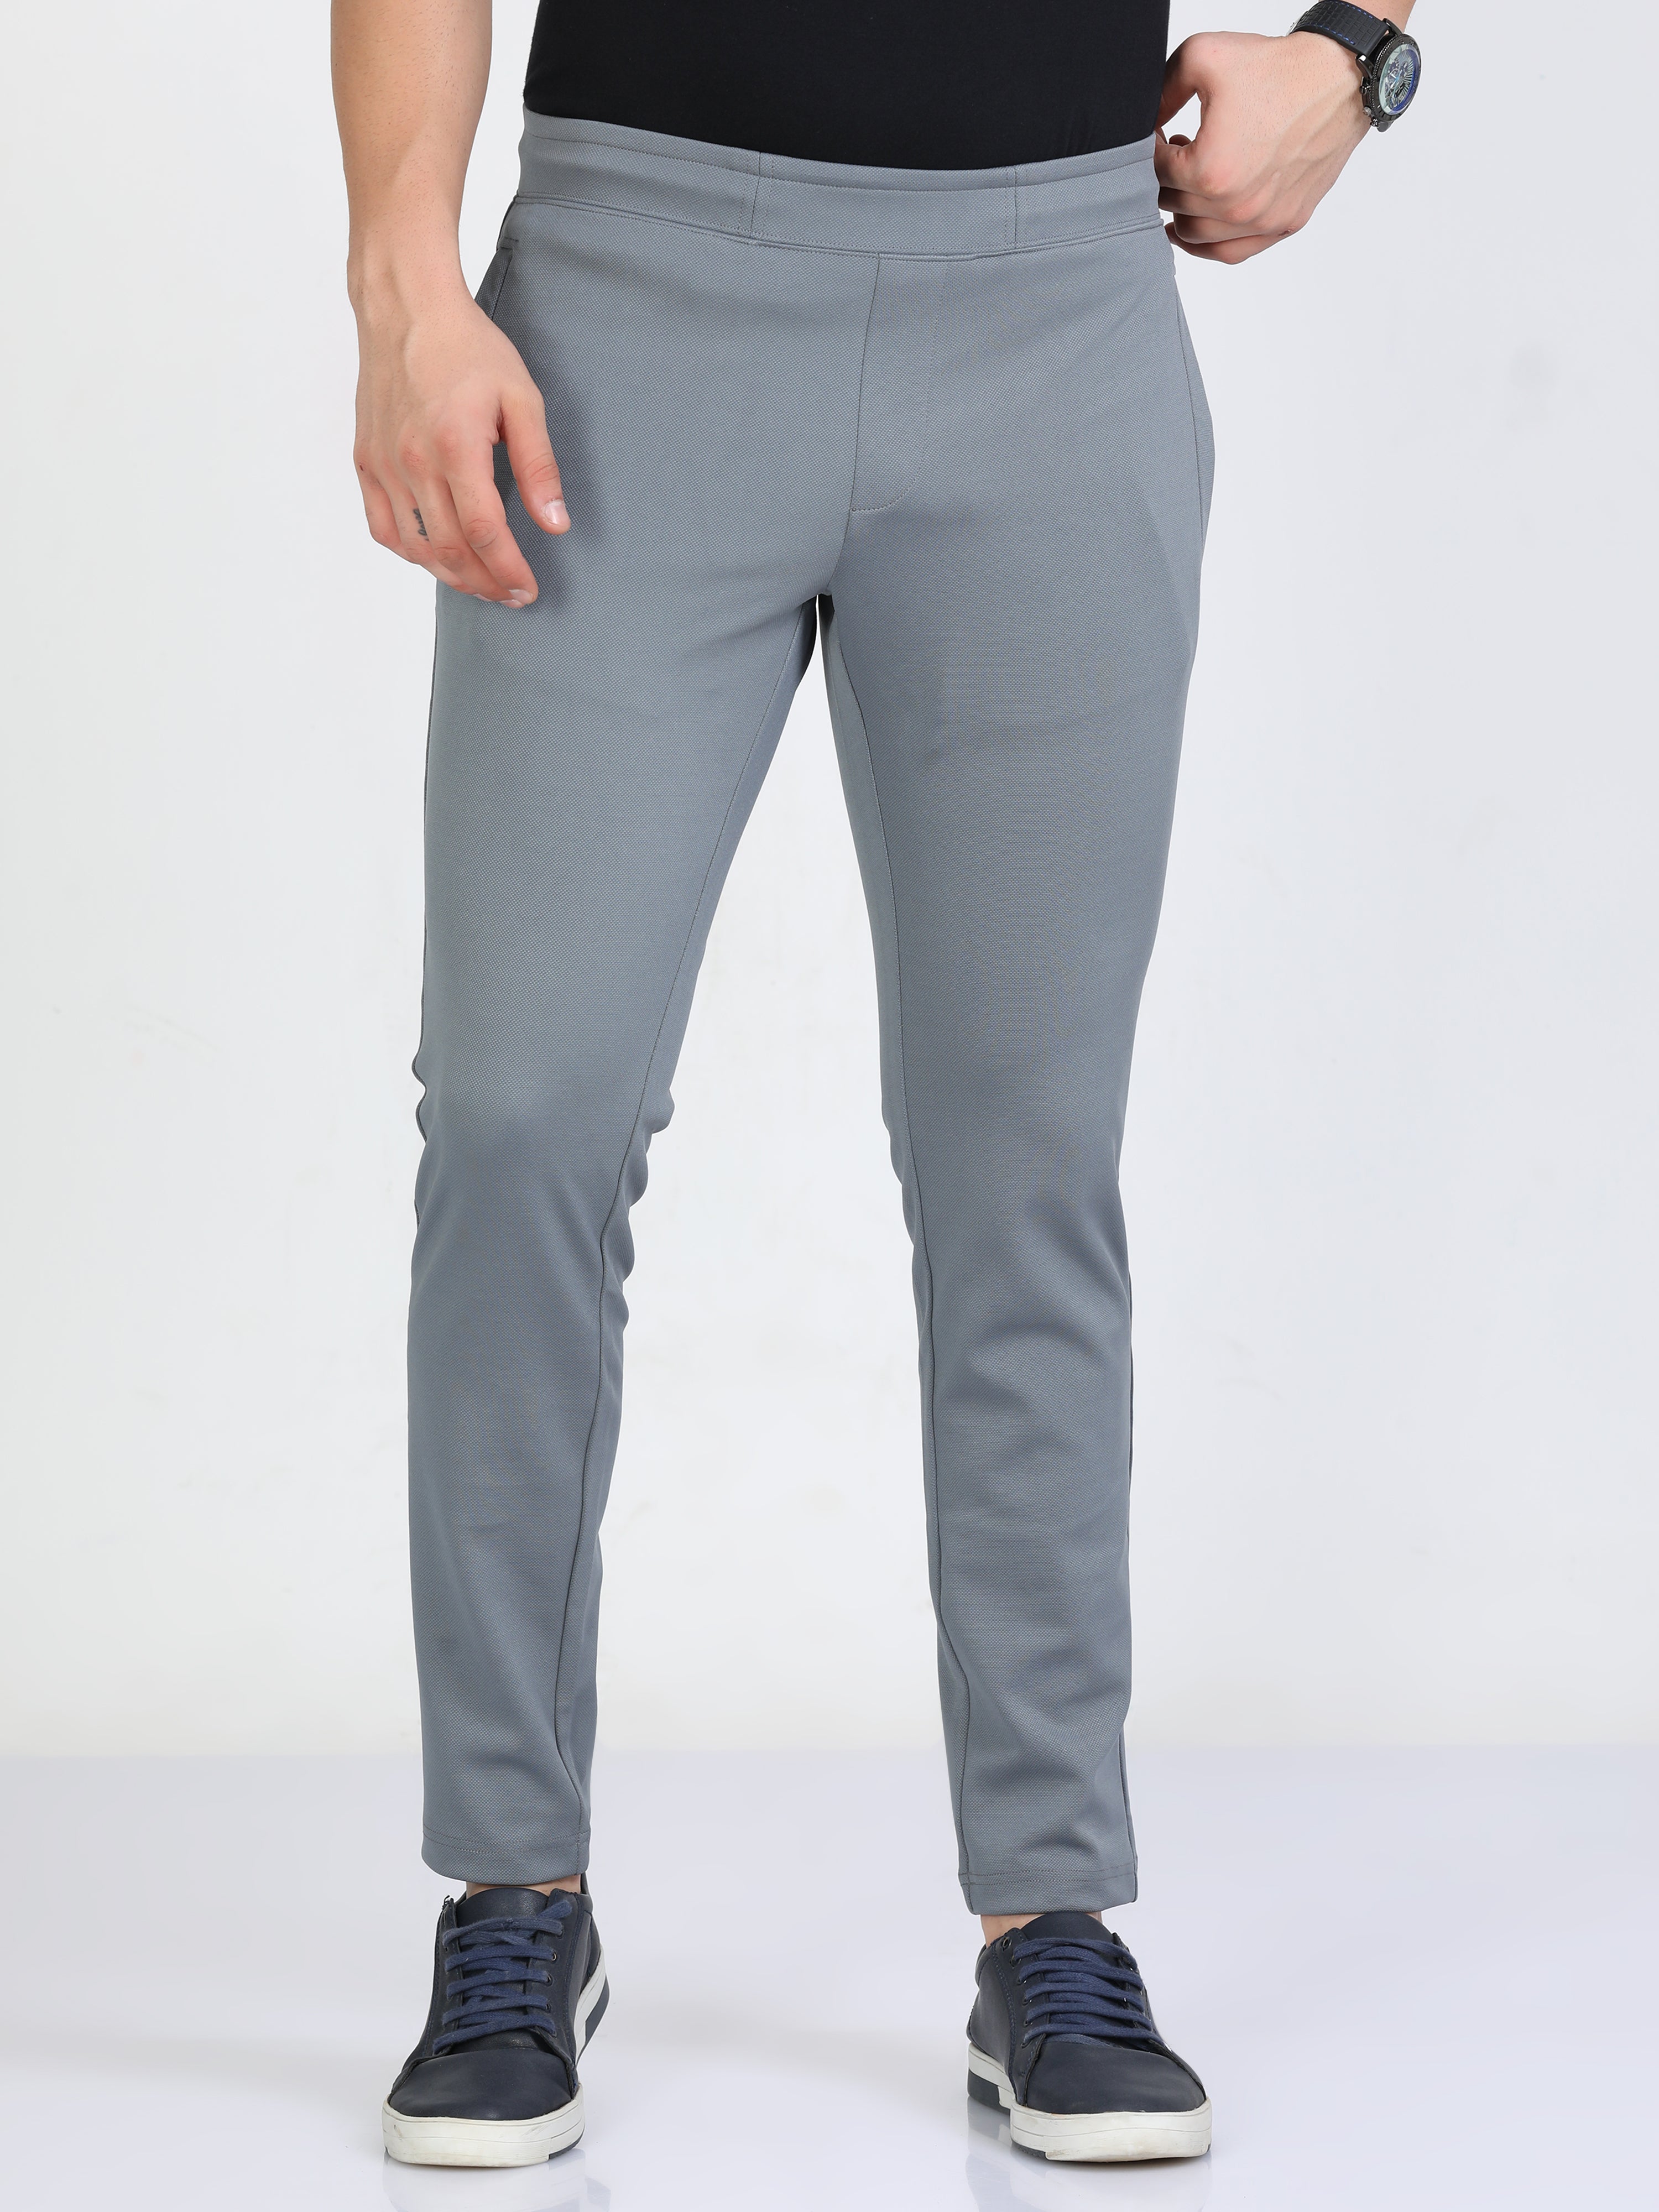 SONGZIO - Drape Jogger Pants | HBX - Globally Curated Fashion and Lifestyle  by Hypebeast